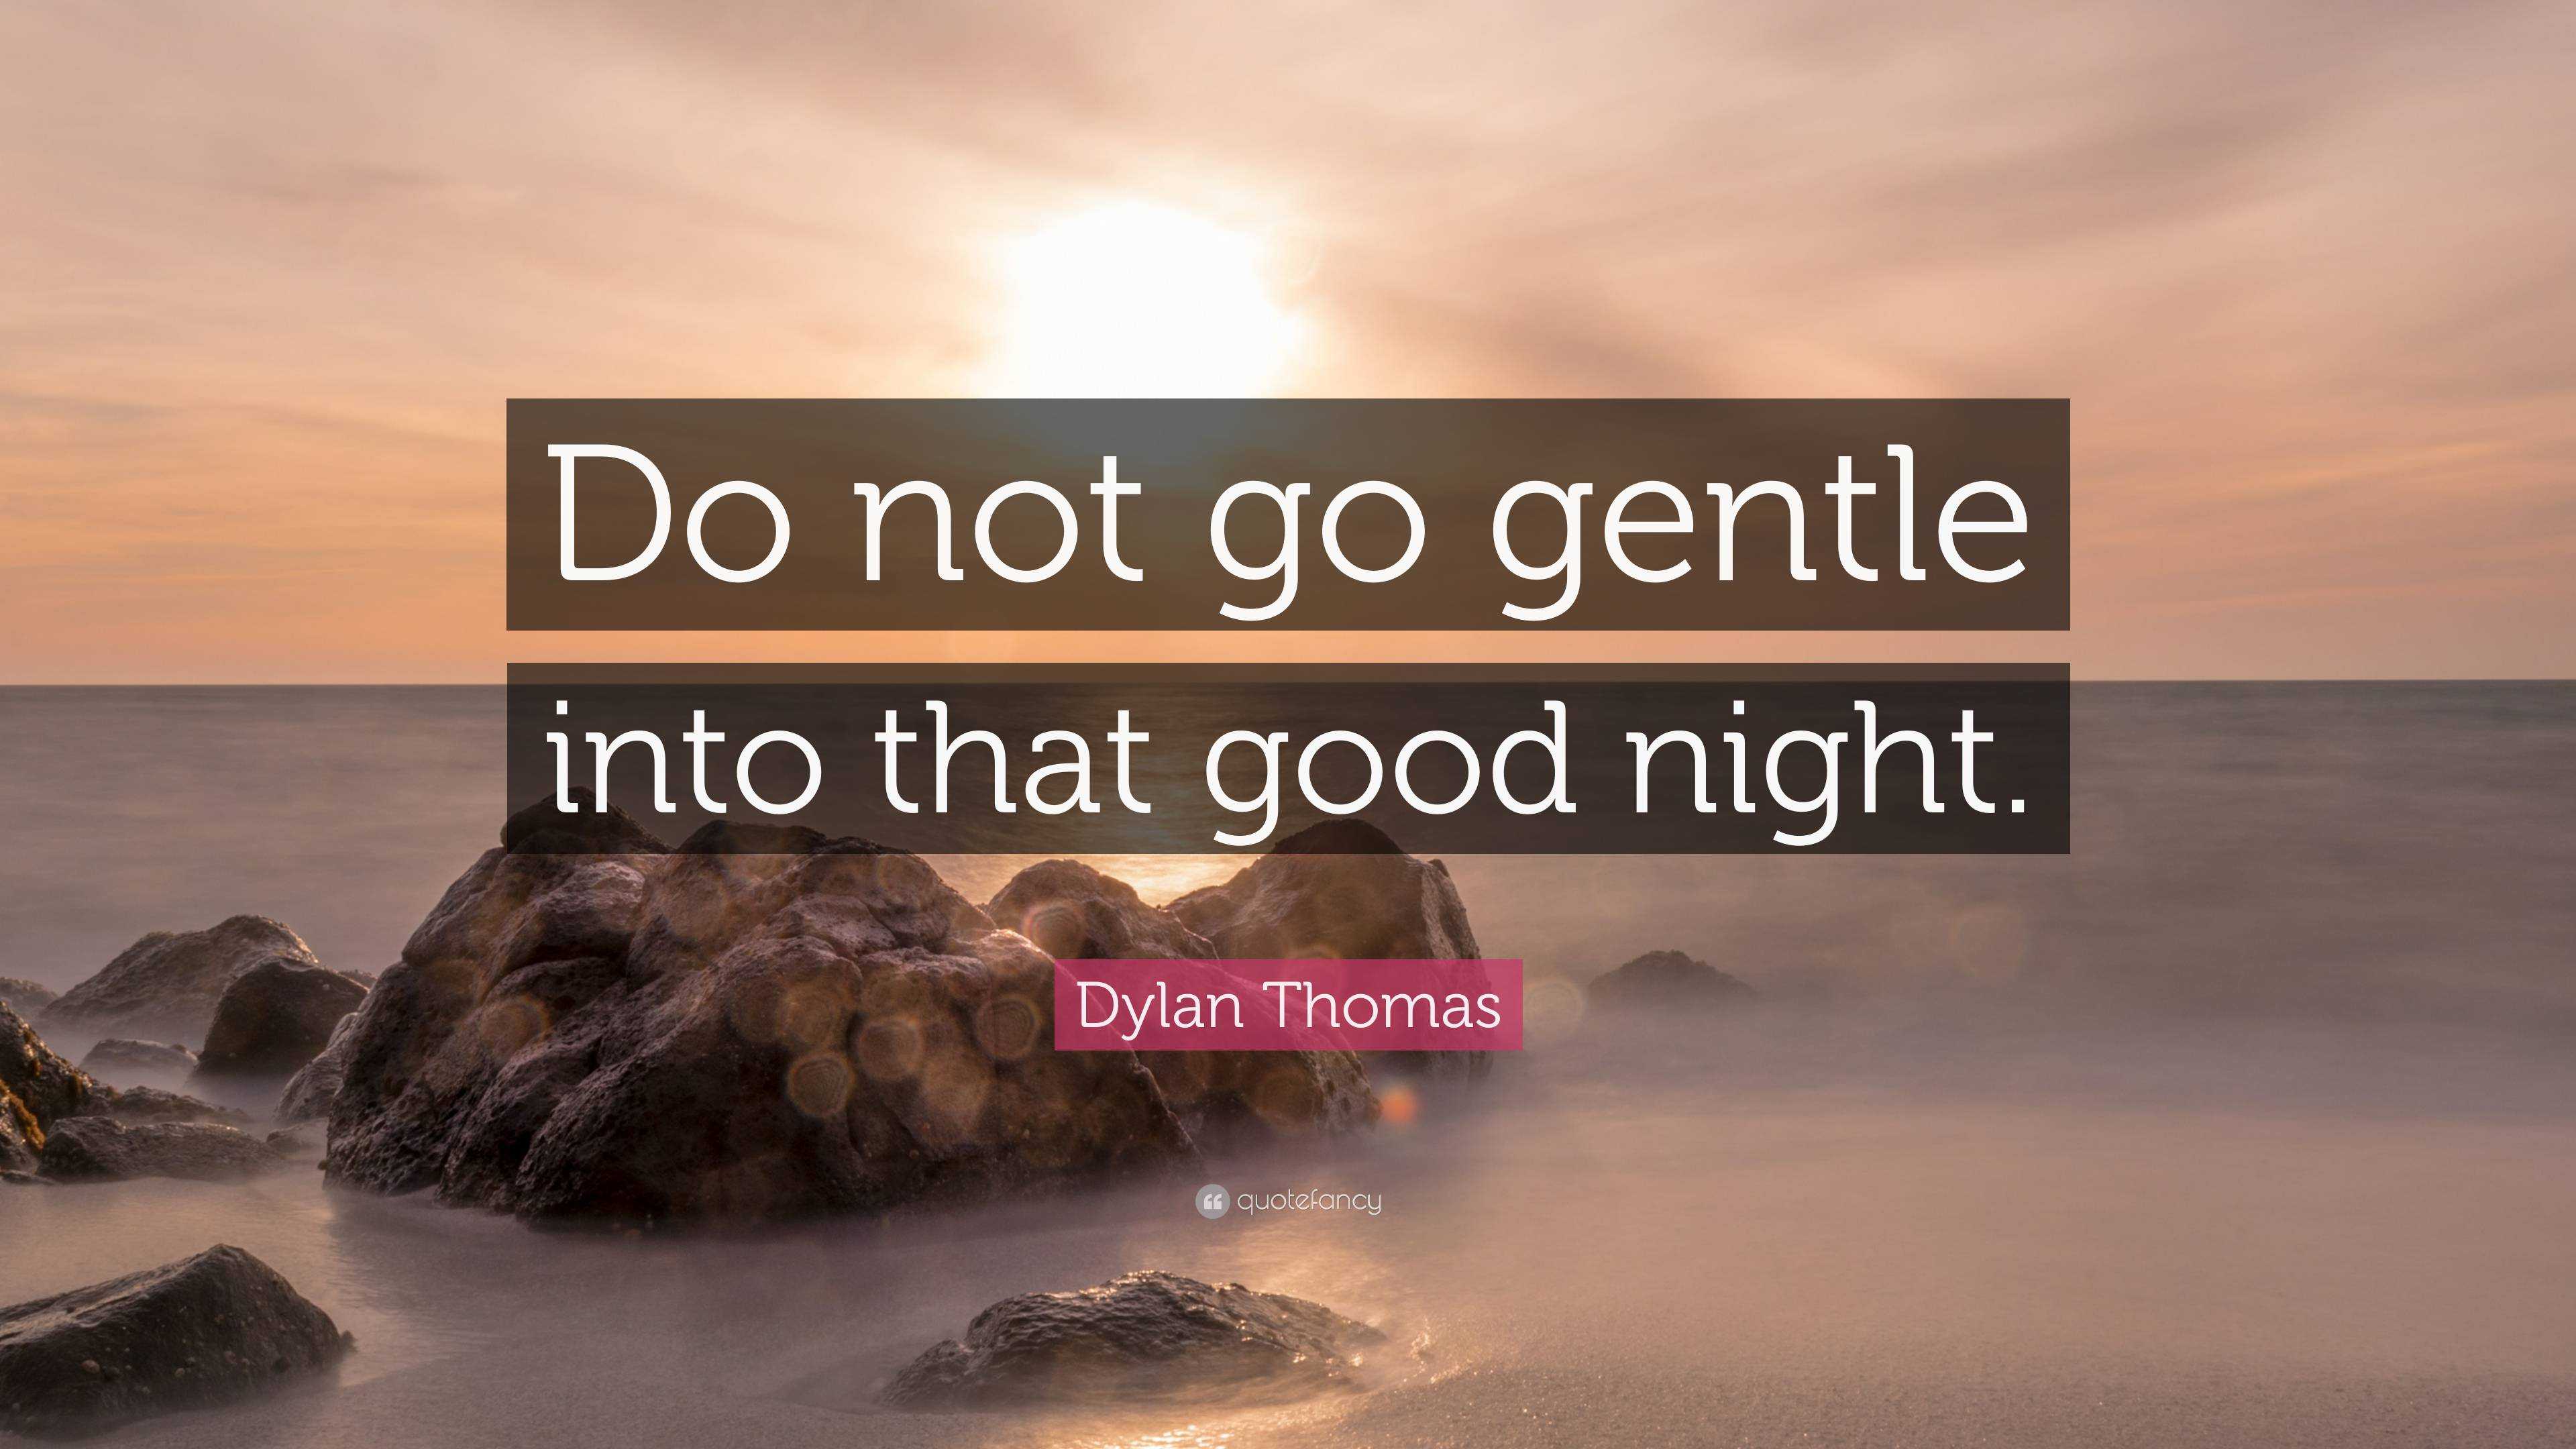 Dylan Thomas Quote: “Do not go gentle into that good night.”